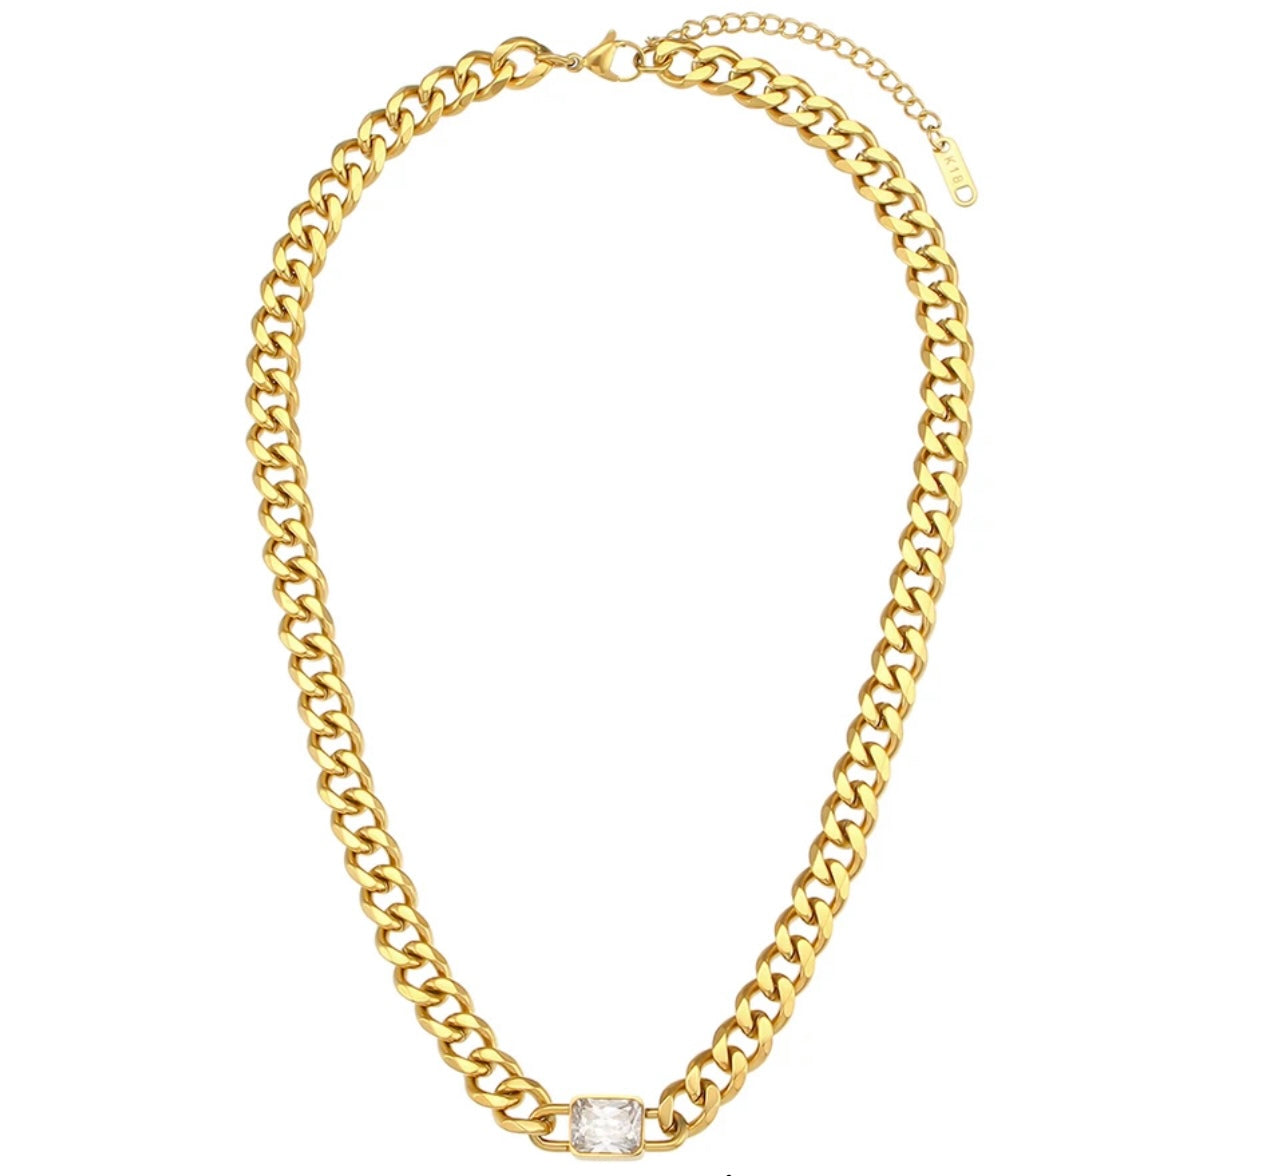 CHAIN WITH DIAMOND PENDANT NECKLACE